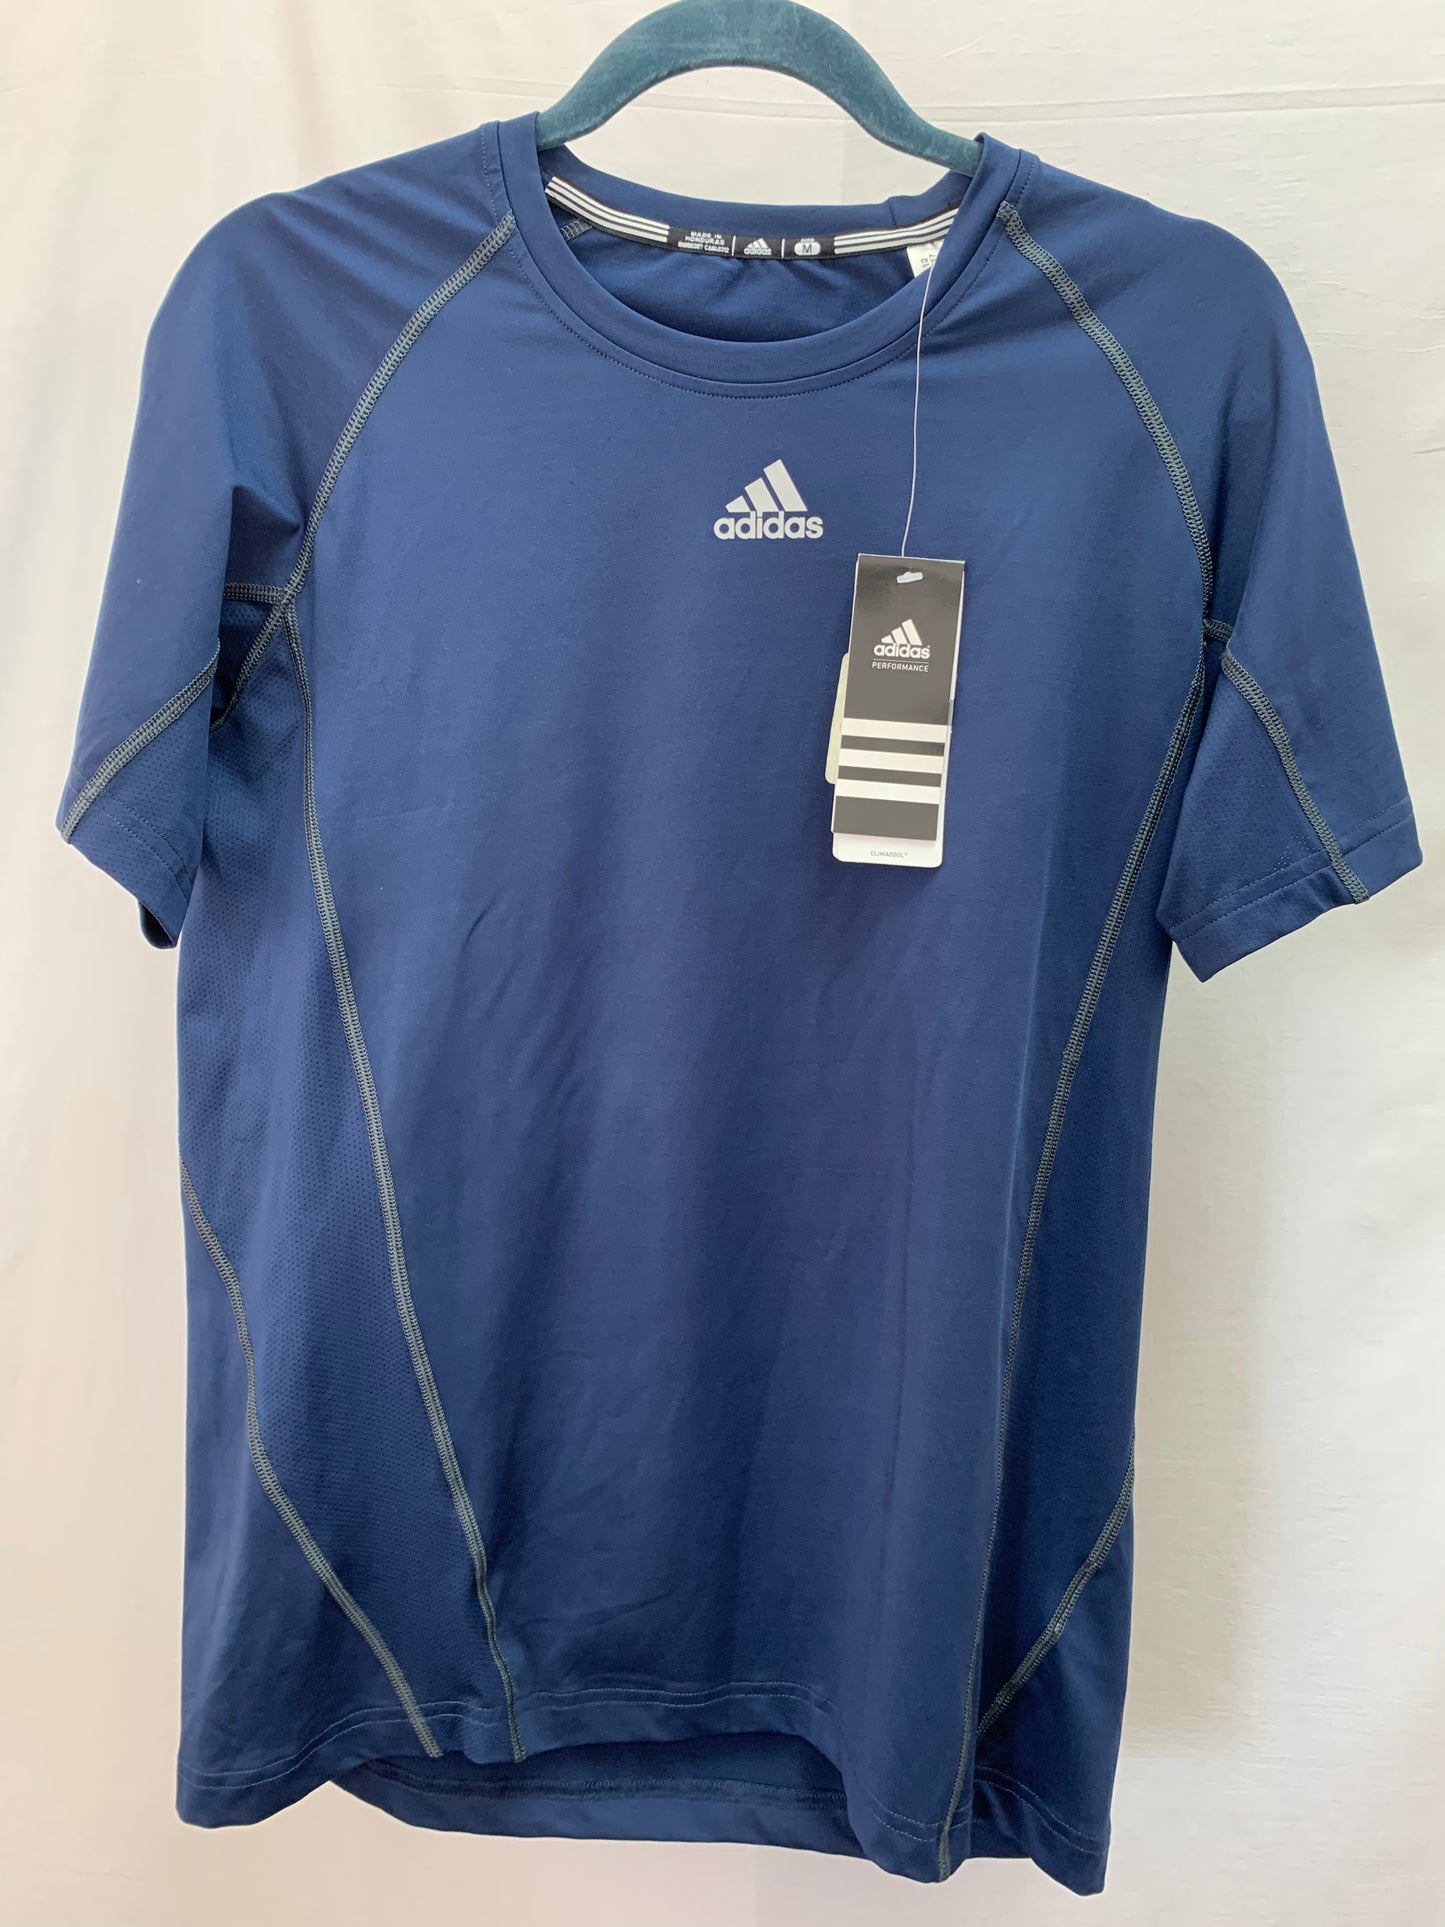 NWT - ADIDAS navy Fitted Short Sleeve CLIMACOOL Shirt - M